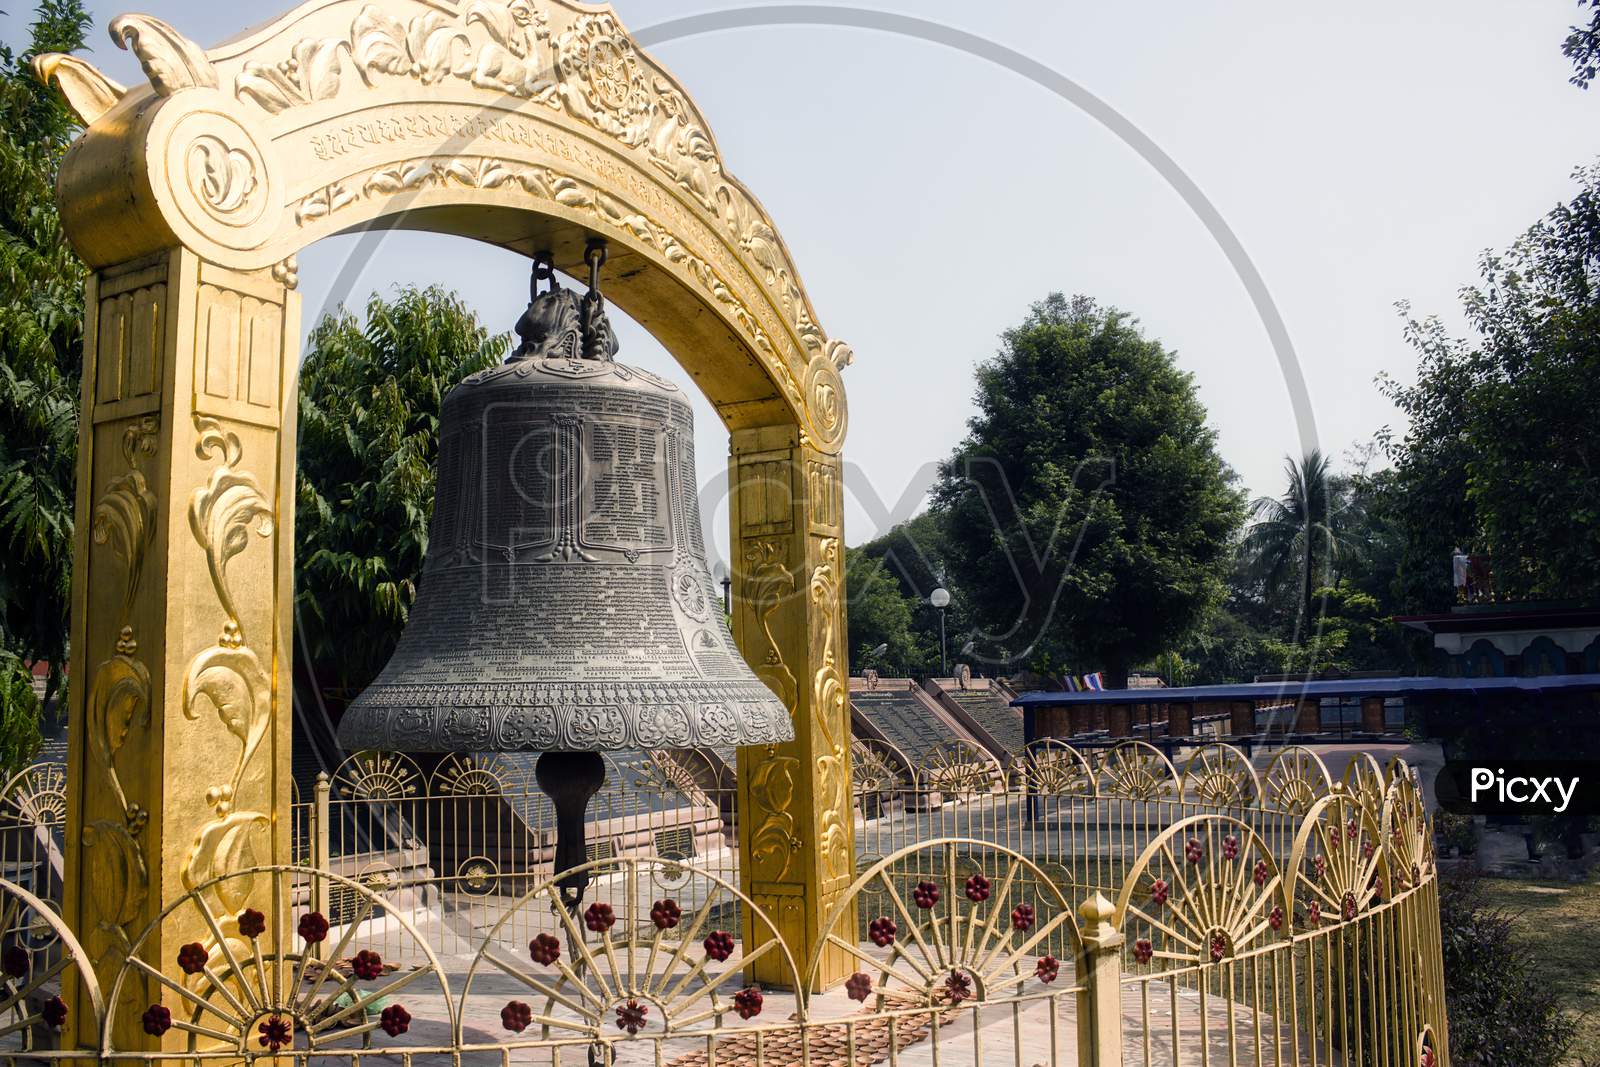 The Sacred Giant Prayer Bell At Bodhi Tree Complex At Sarnath, Where Buddha Gained Enlightenment About 2500 Years Ago